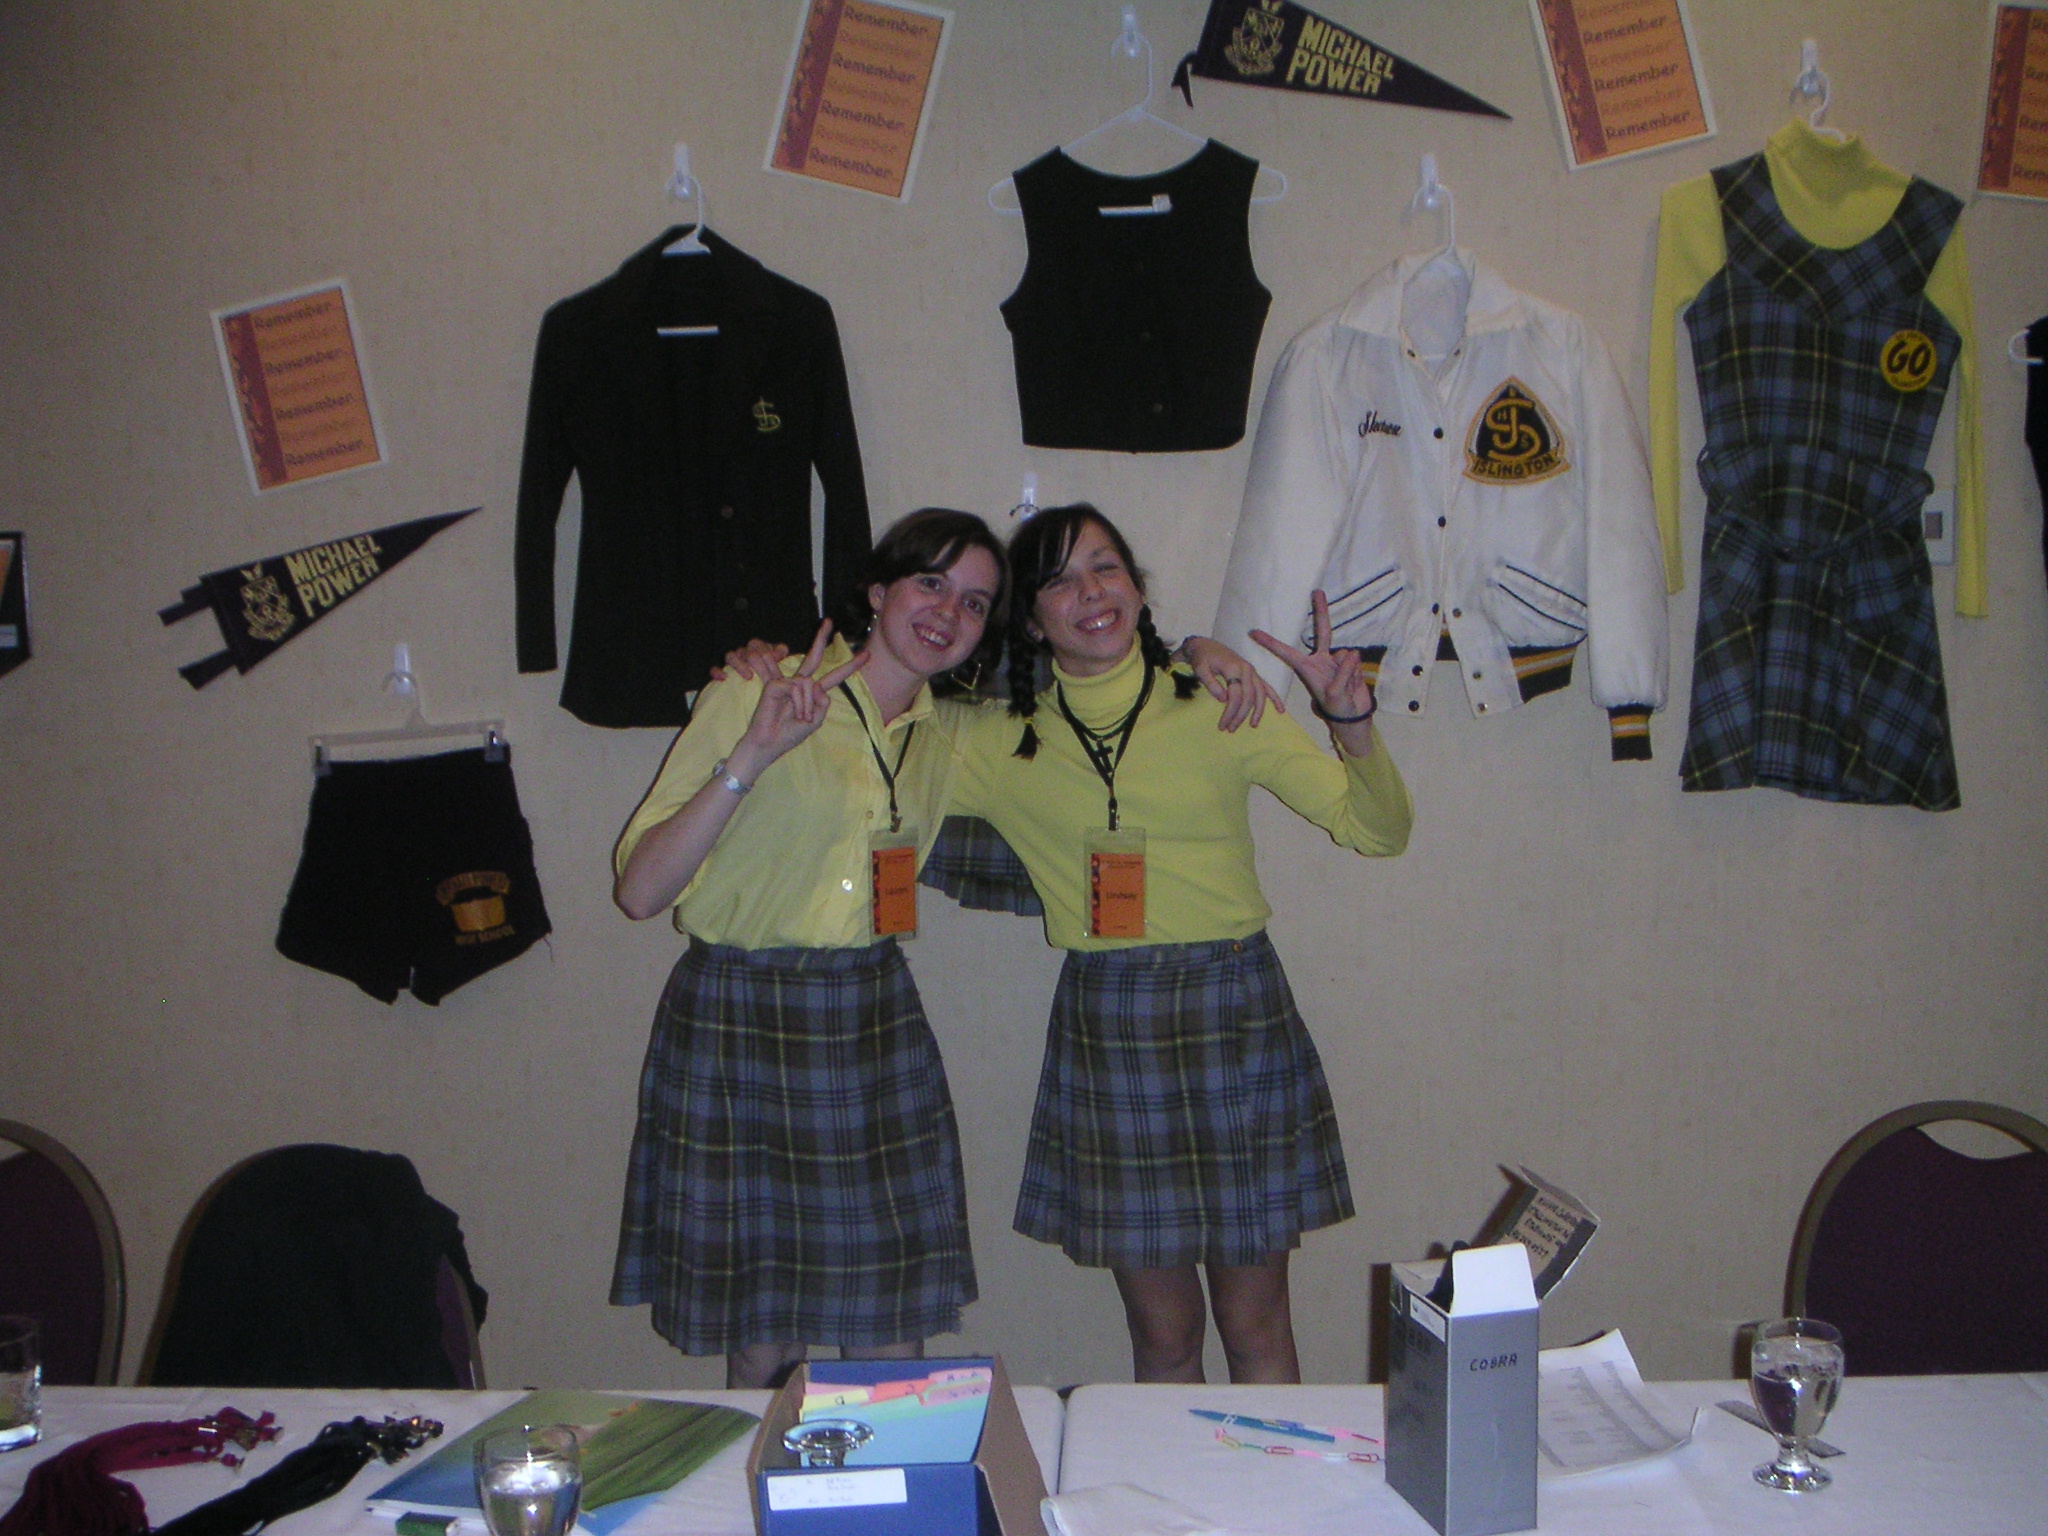 Lauren and Lindsy model the old uniform. Behind them are more original high school fashions.